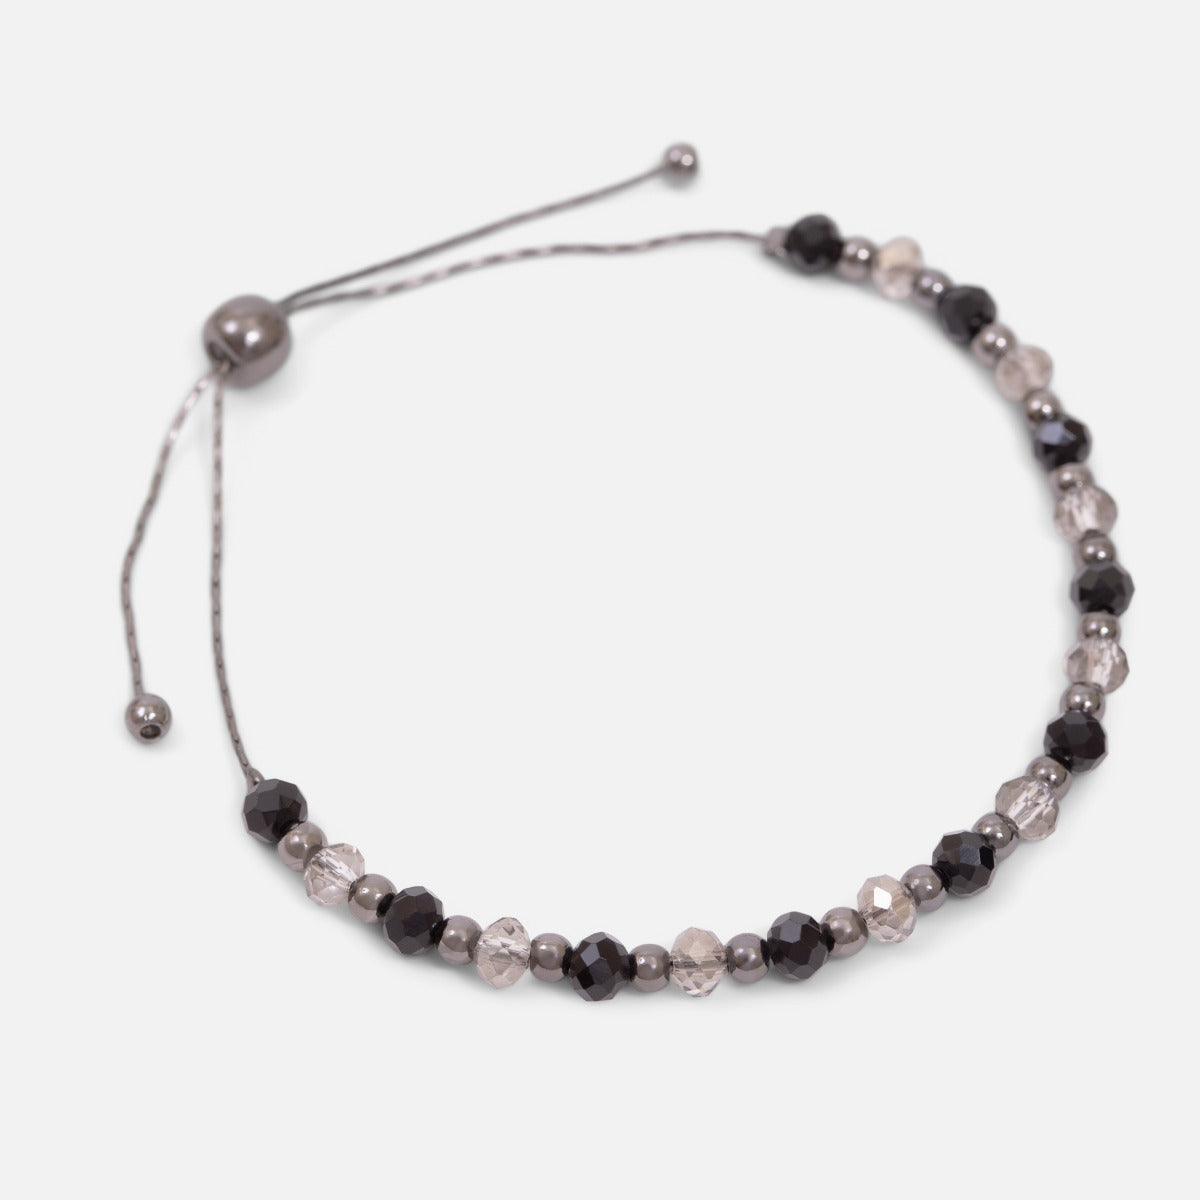 Adjustable silvered bracelet with black and grey beads